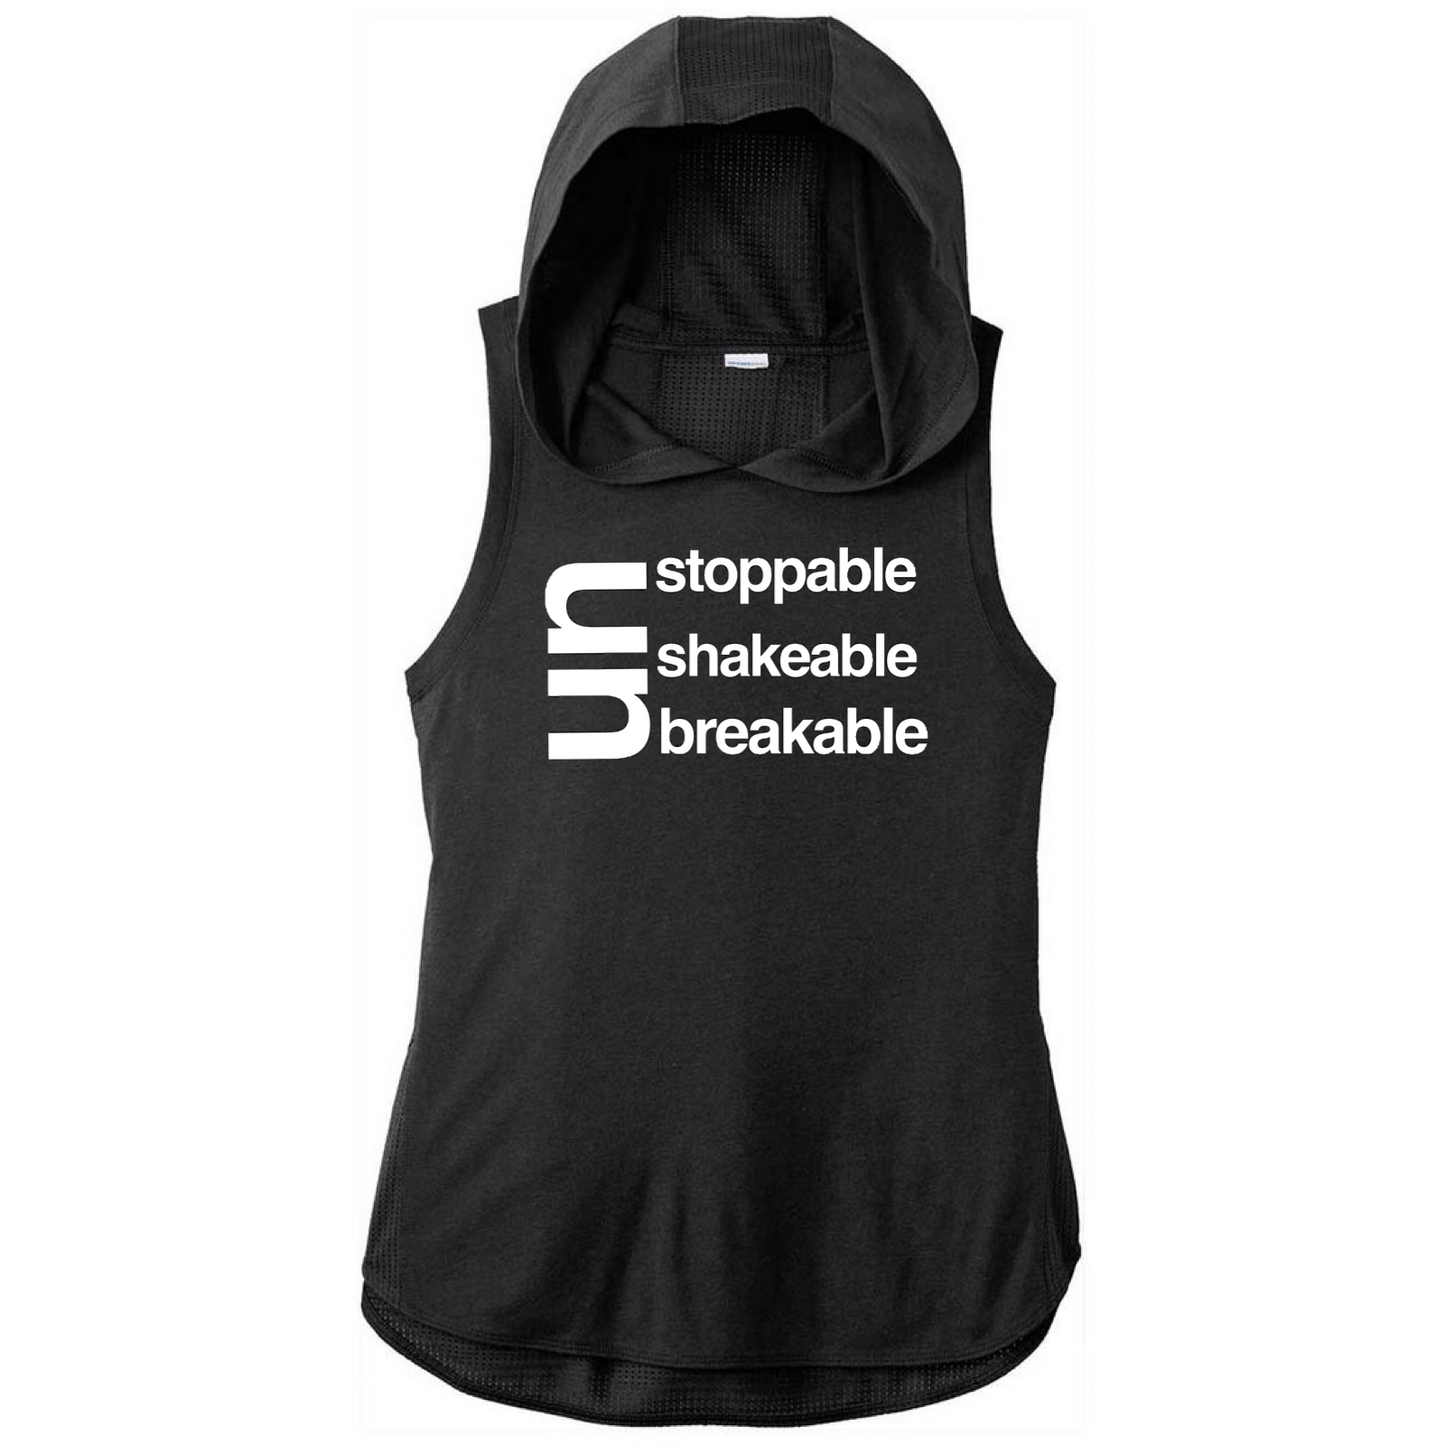 Unstoppable Unshakable Unbreakable   Fitness Hoodie Tank Top